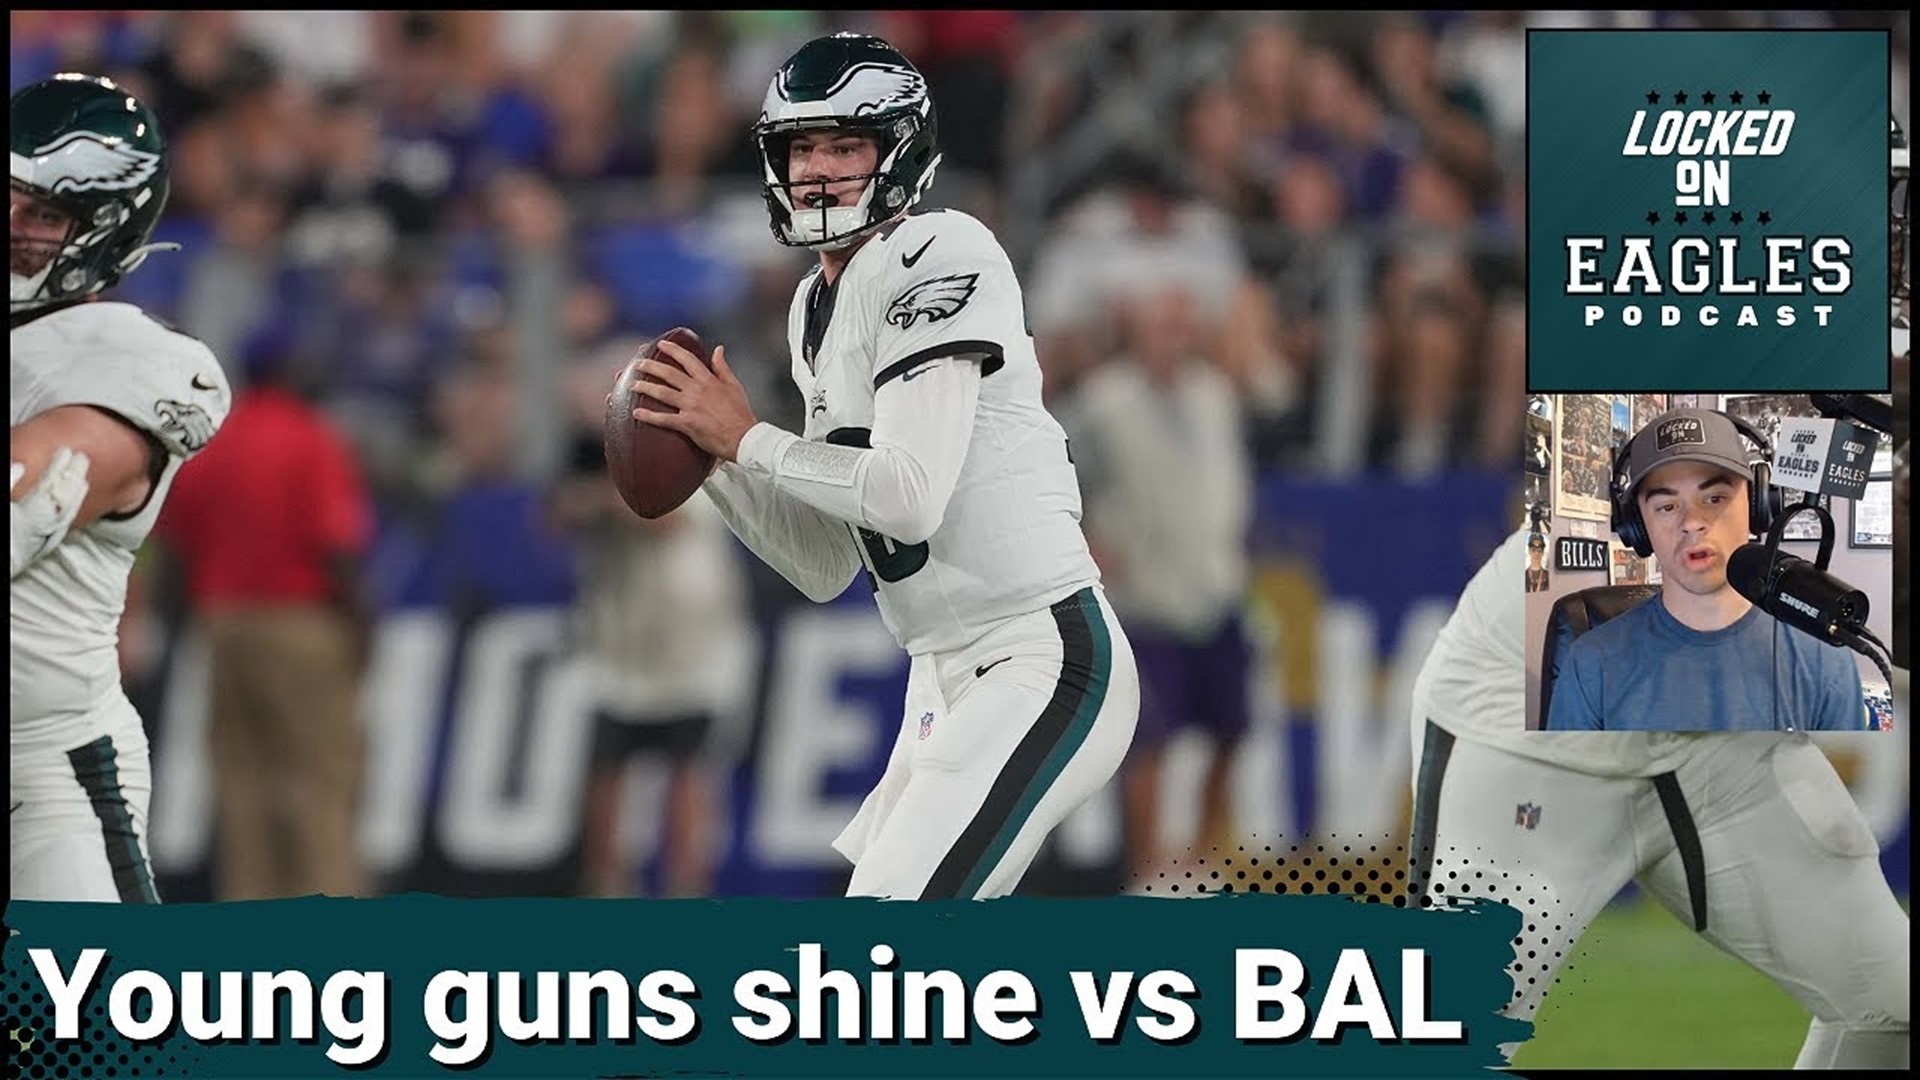 Jalen Carter, Tanner McKee, and the Philadelphia Eagles young guns stood out on Saturday night despite a 20-19 loss to the Baltimore Ravens in the preseason opener.